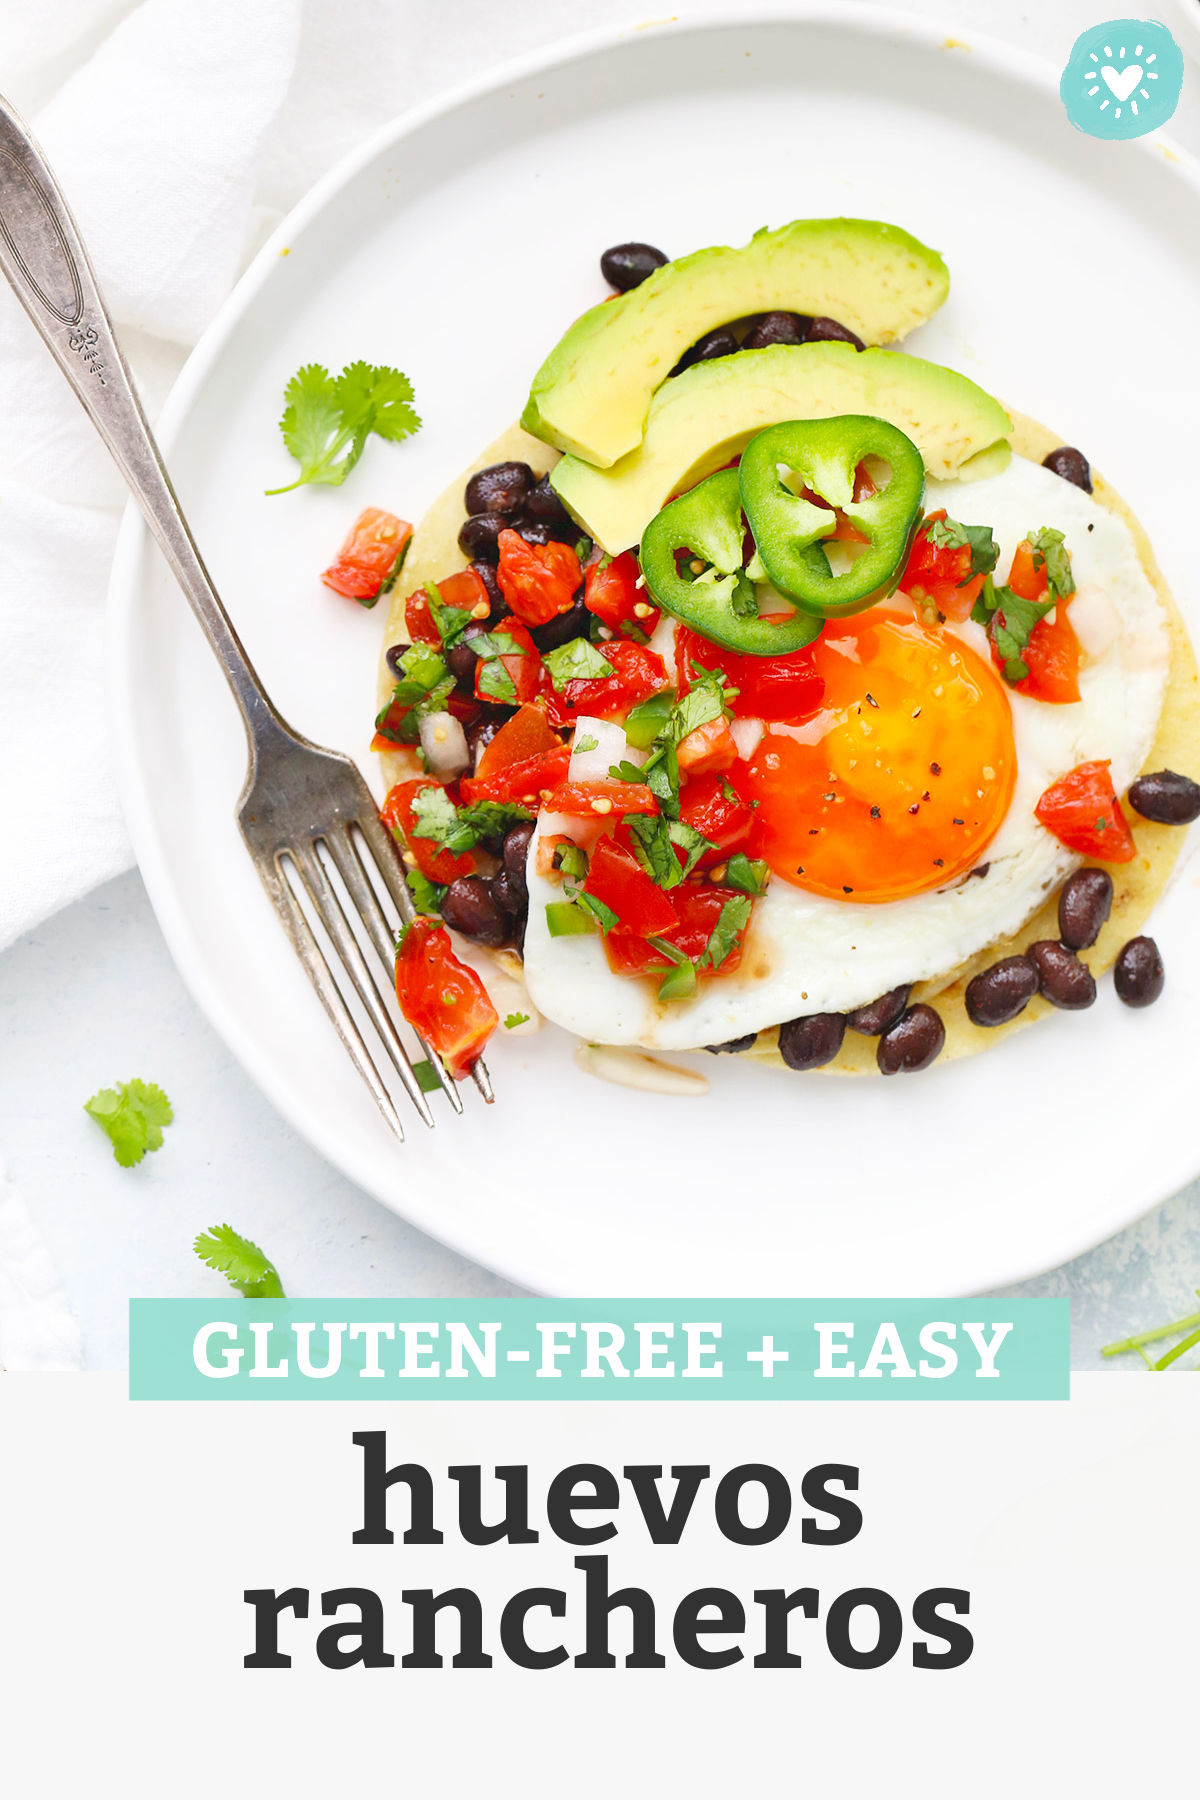 Close up view of huevos rancheros on a white plate with fresh pico de gallo with text overlay that reads "gluten-free + easy huevos rancheros"